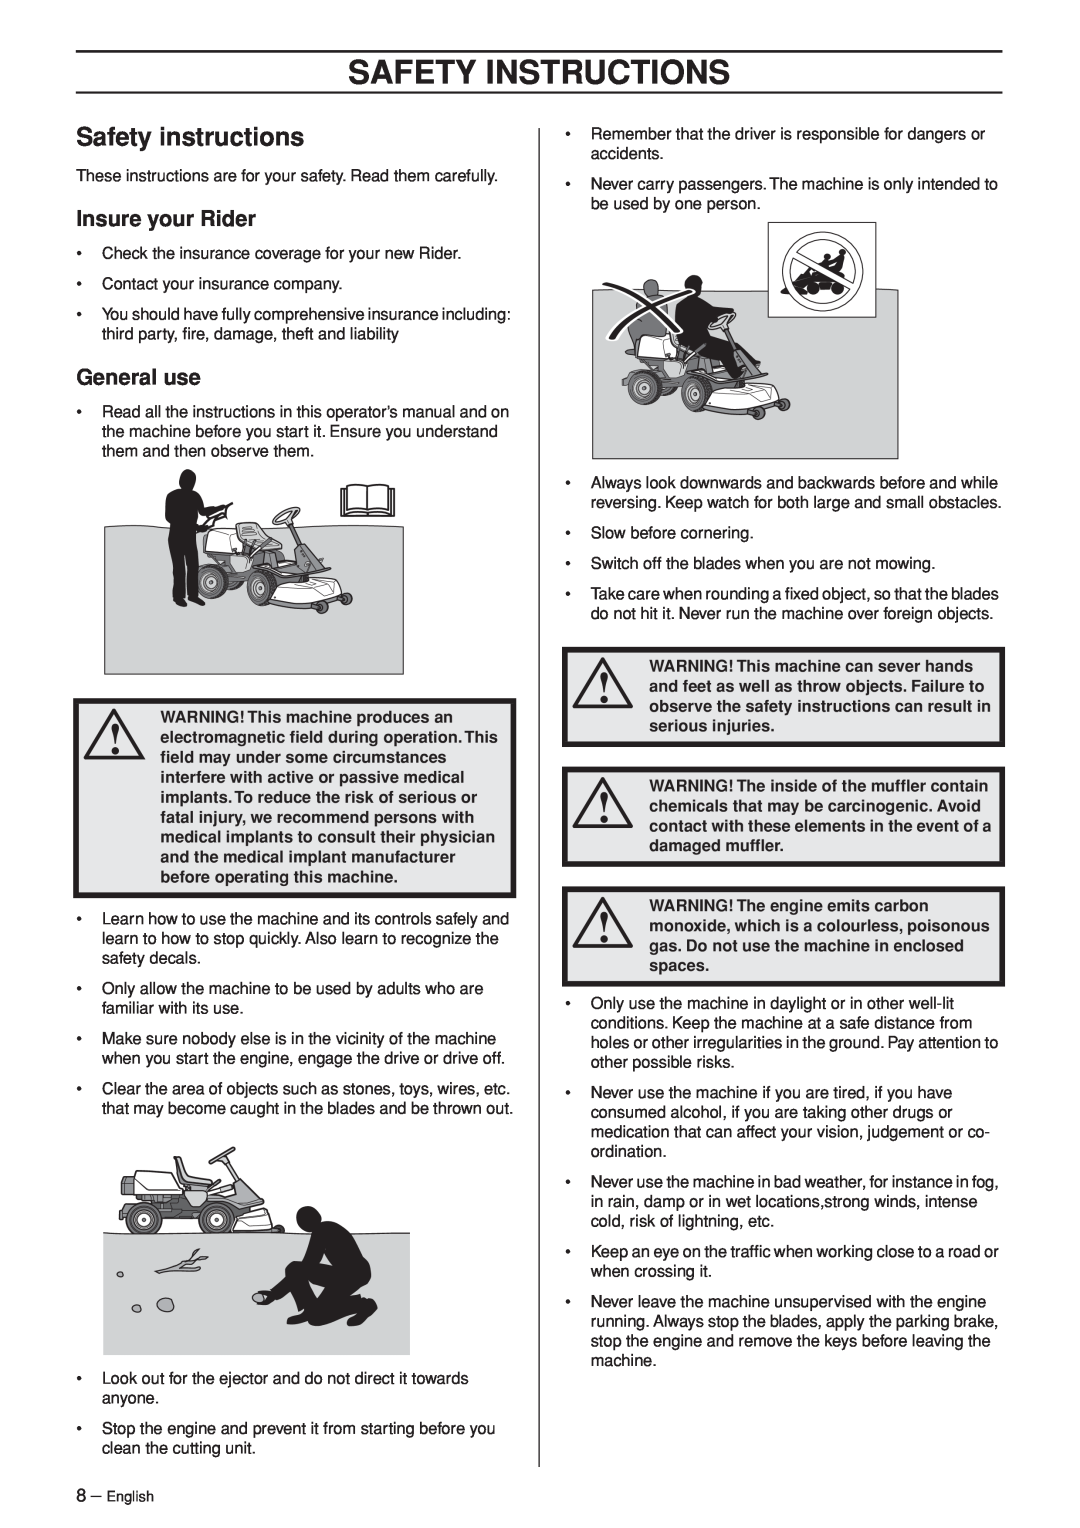 Husqvarna Rider 320 AWD Safety Instructions, Safety instructions, Insure your Rider, General use, serious injuries, spaces 